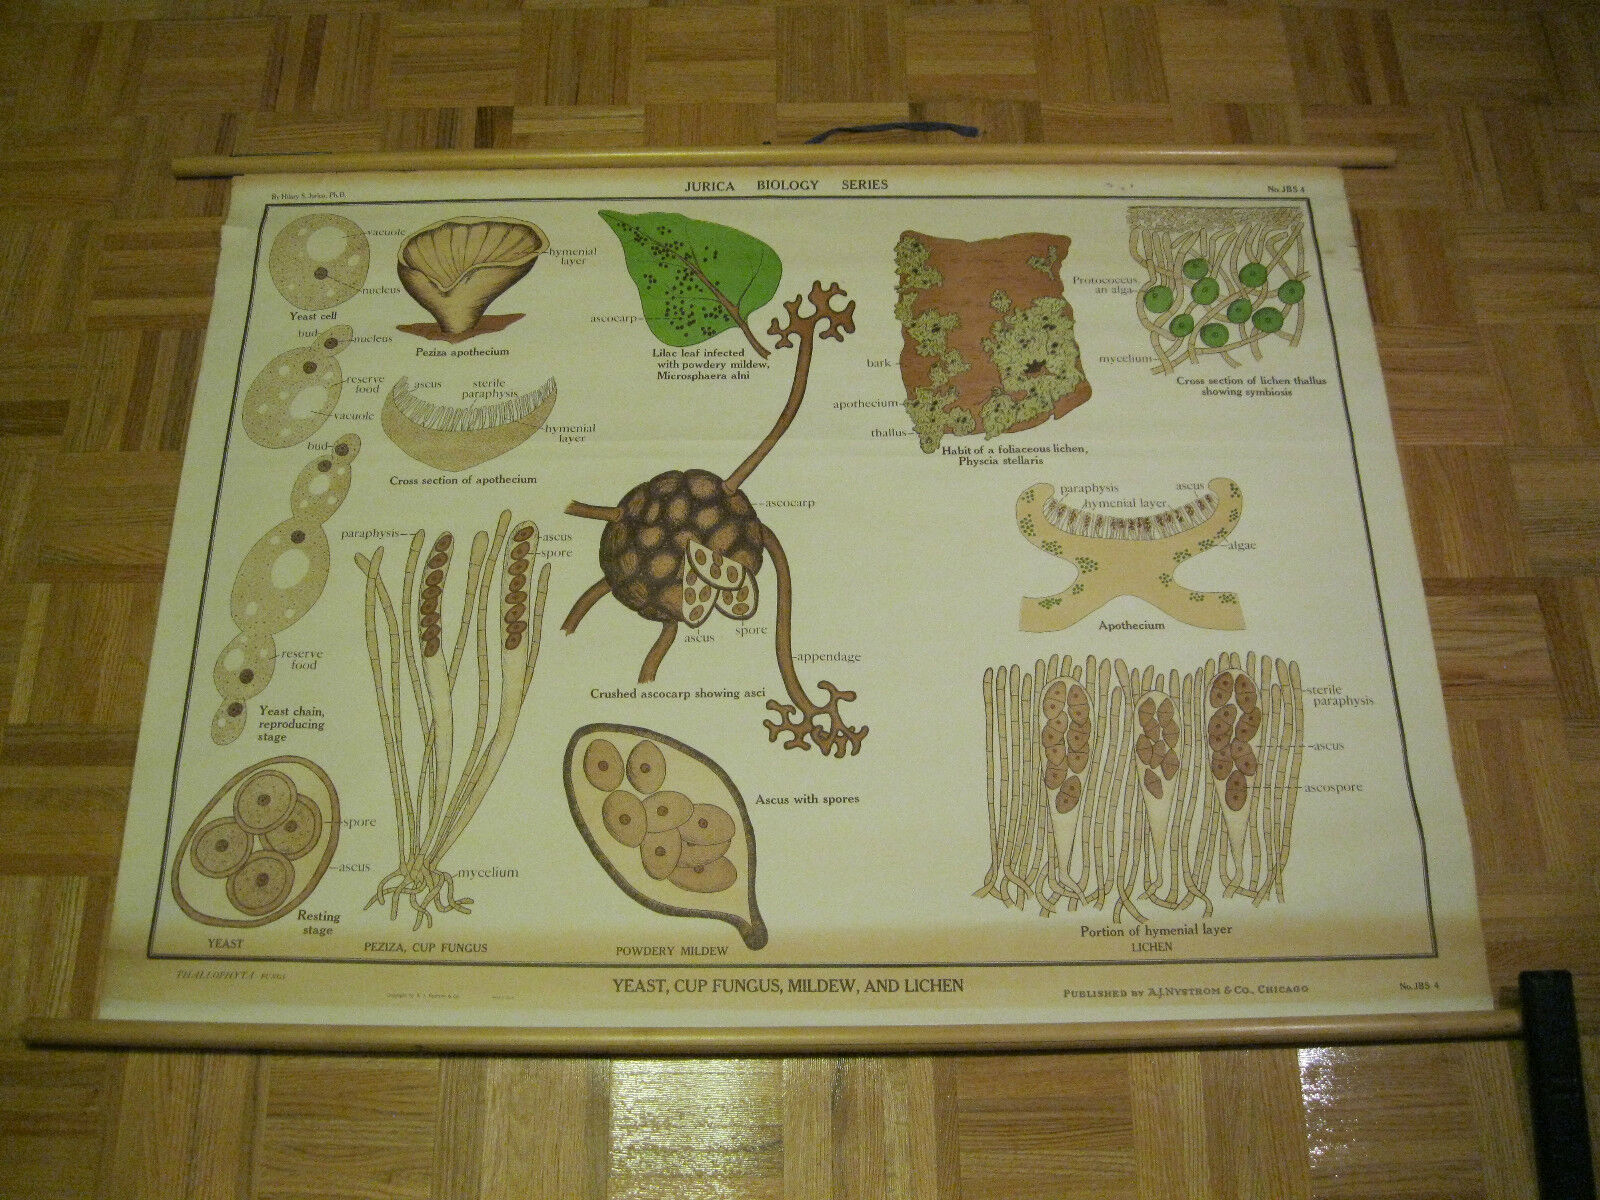 Jurica Biology Yeast, Cup Fungus, & Mildew Aj Nystrom & Co Chicago Science Chart